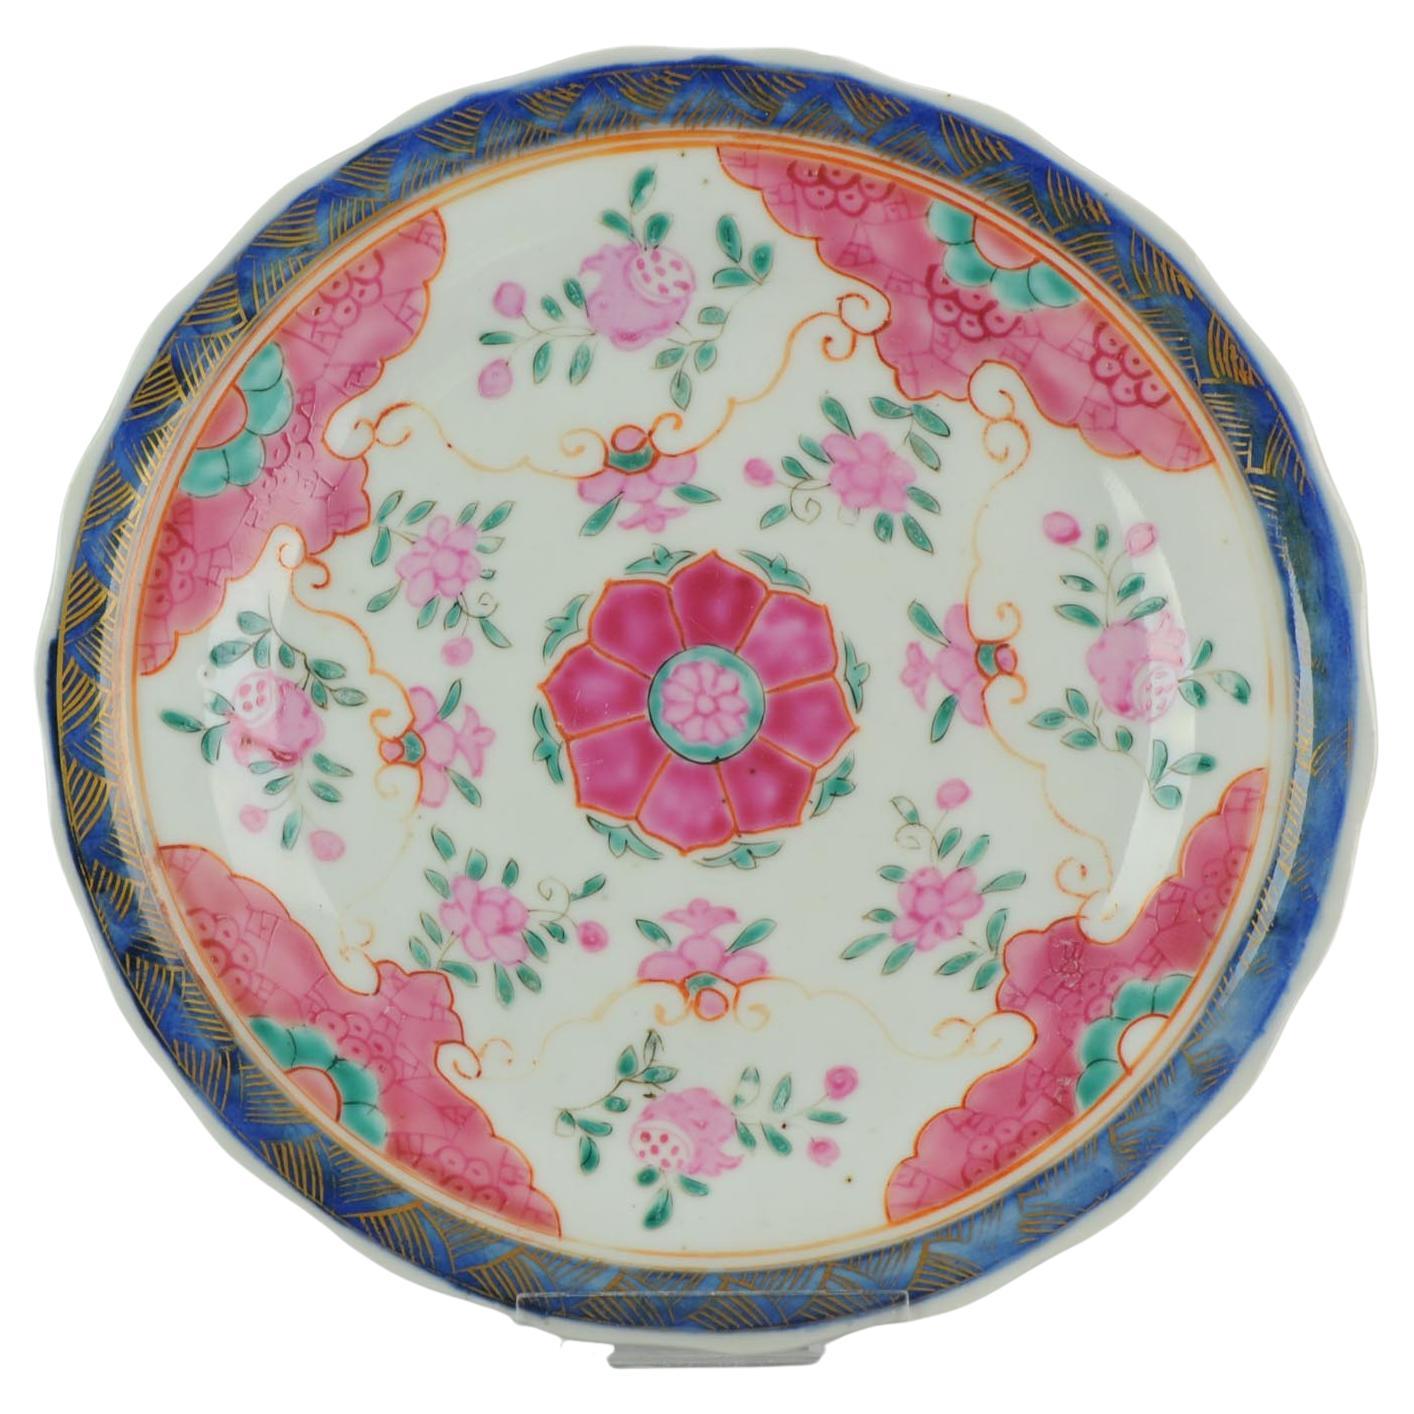 Antique Chinese Porcelain Pre Bencharong Famille Rose Plate, ca 1800